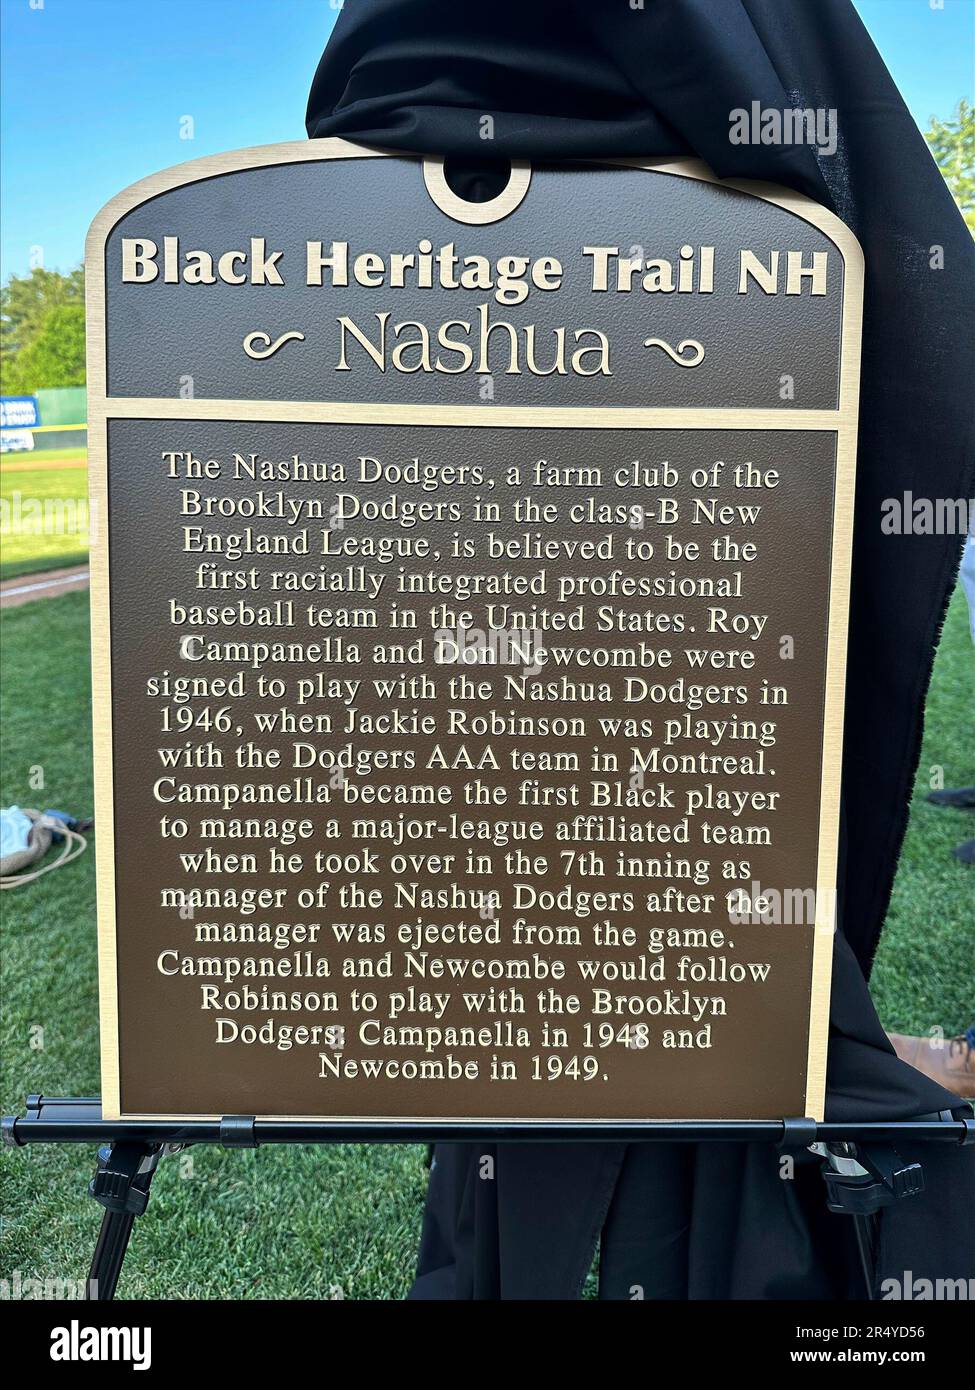 Nashua recognized for historic role in integrating baseball